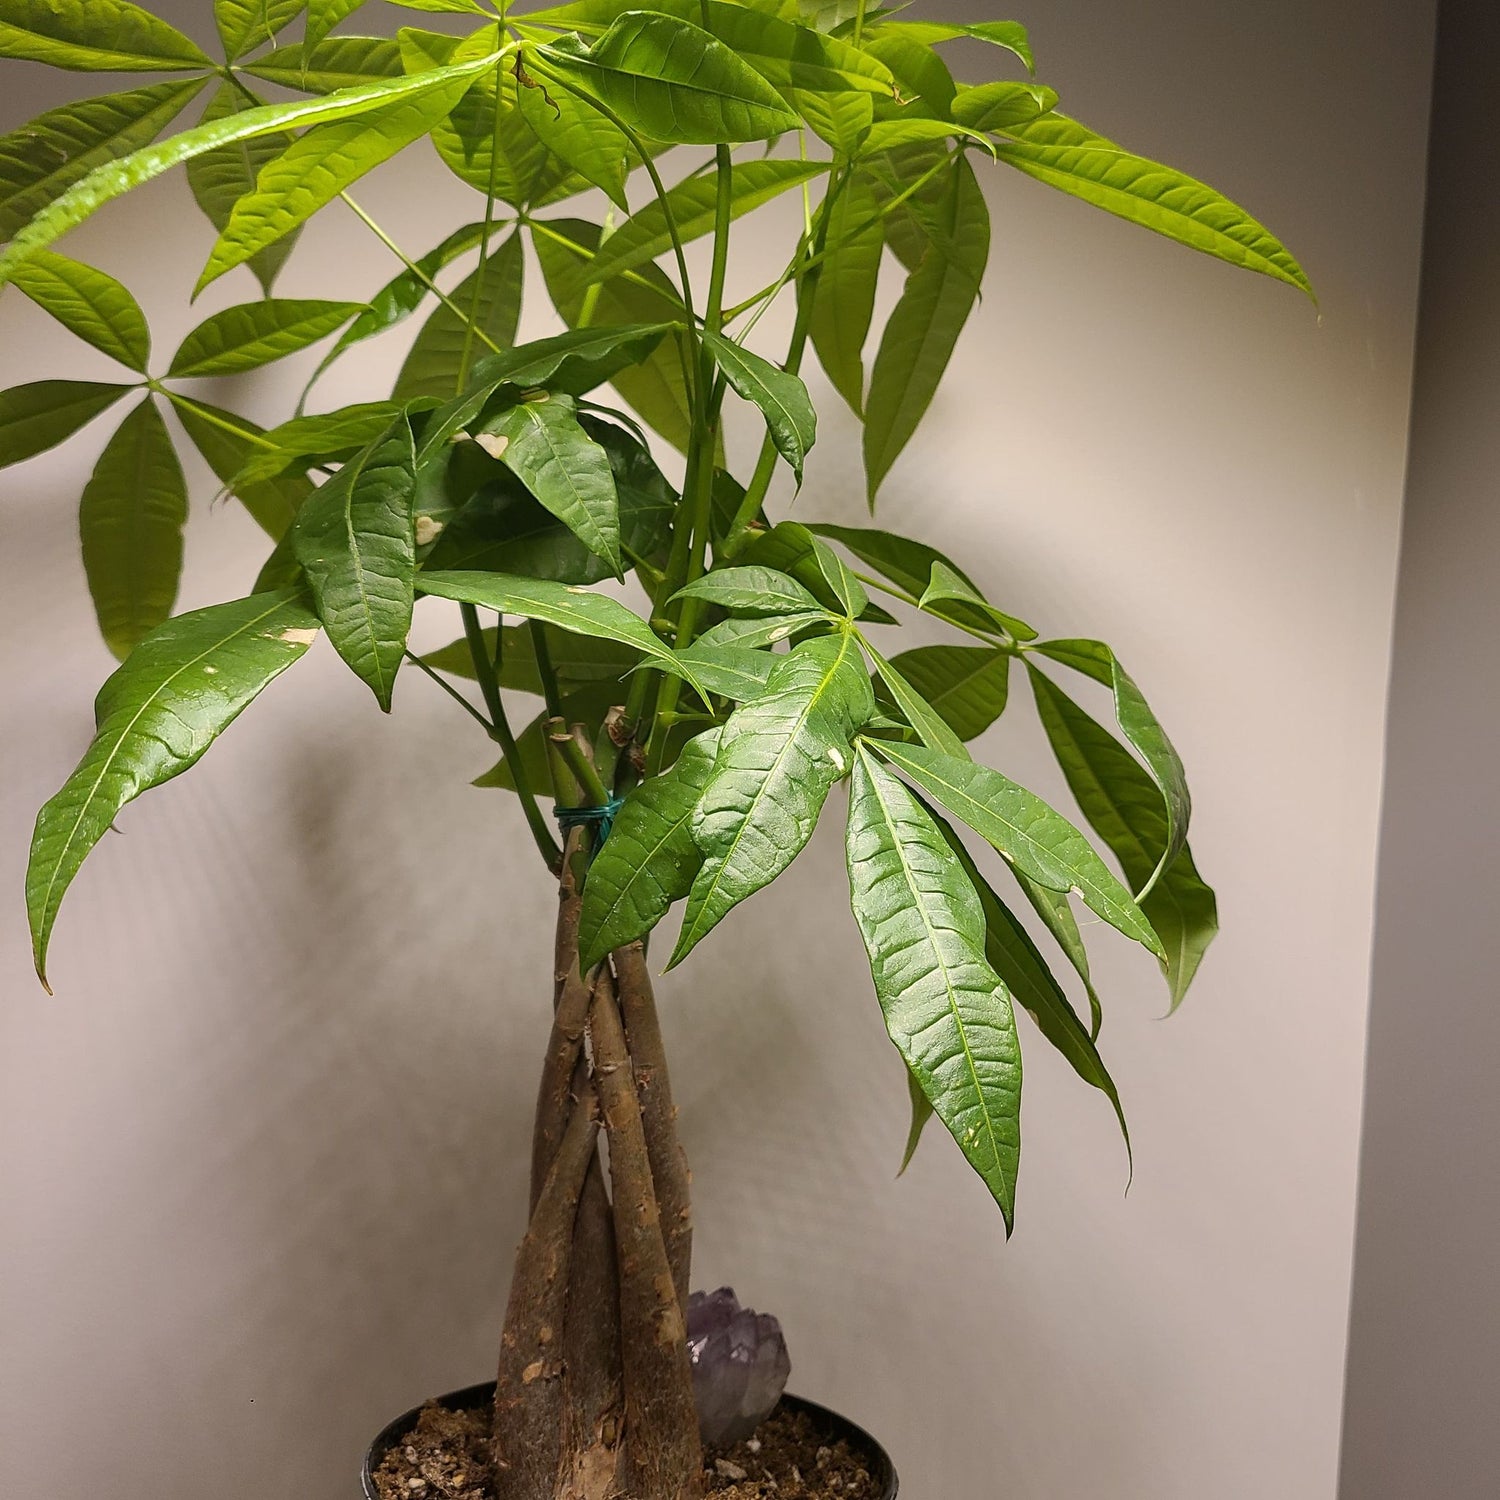 The Plant of Luck and Abundance: How to Care for Your Money Tree